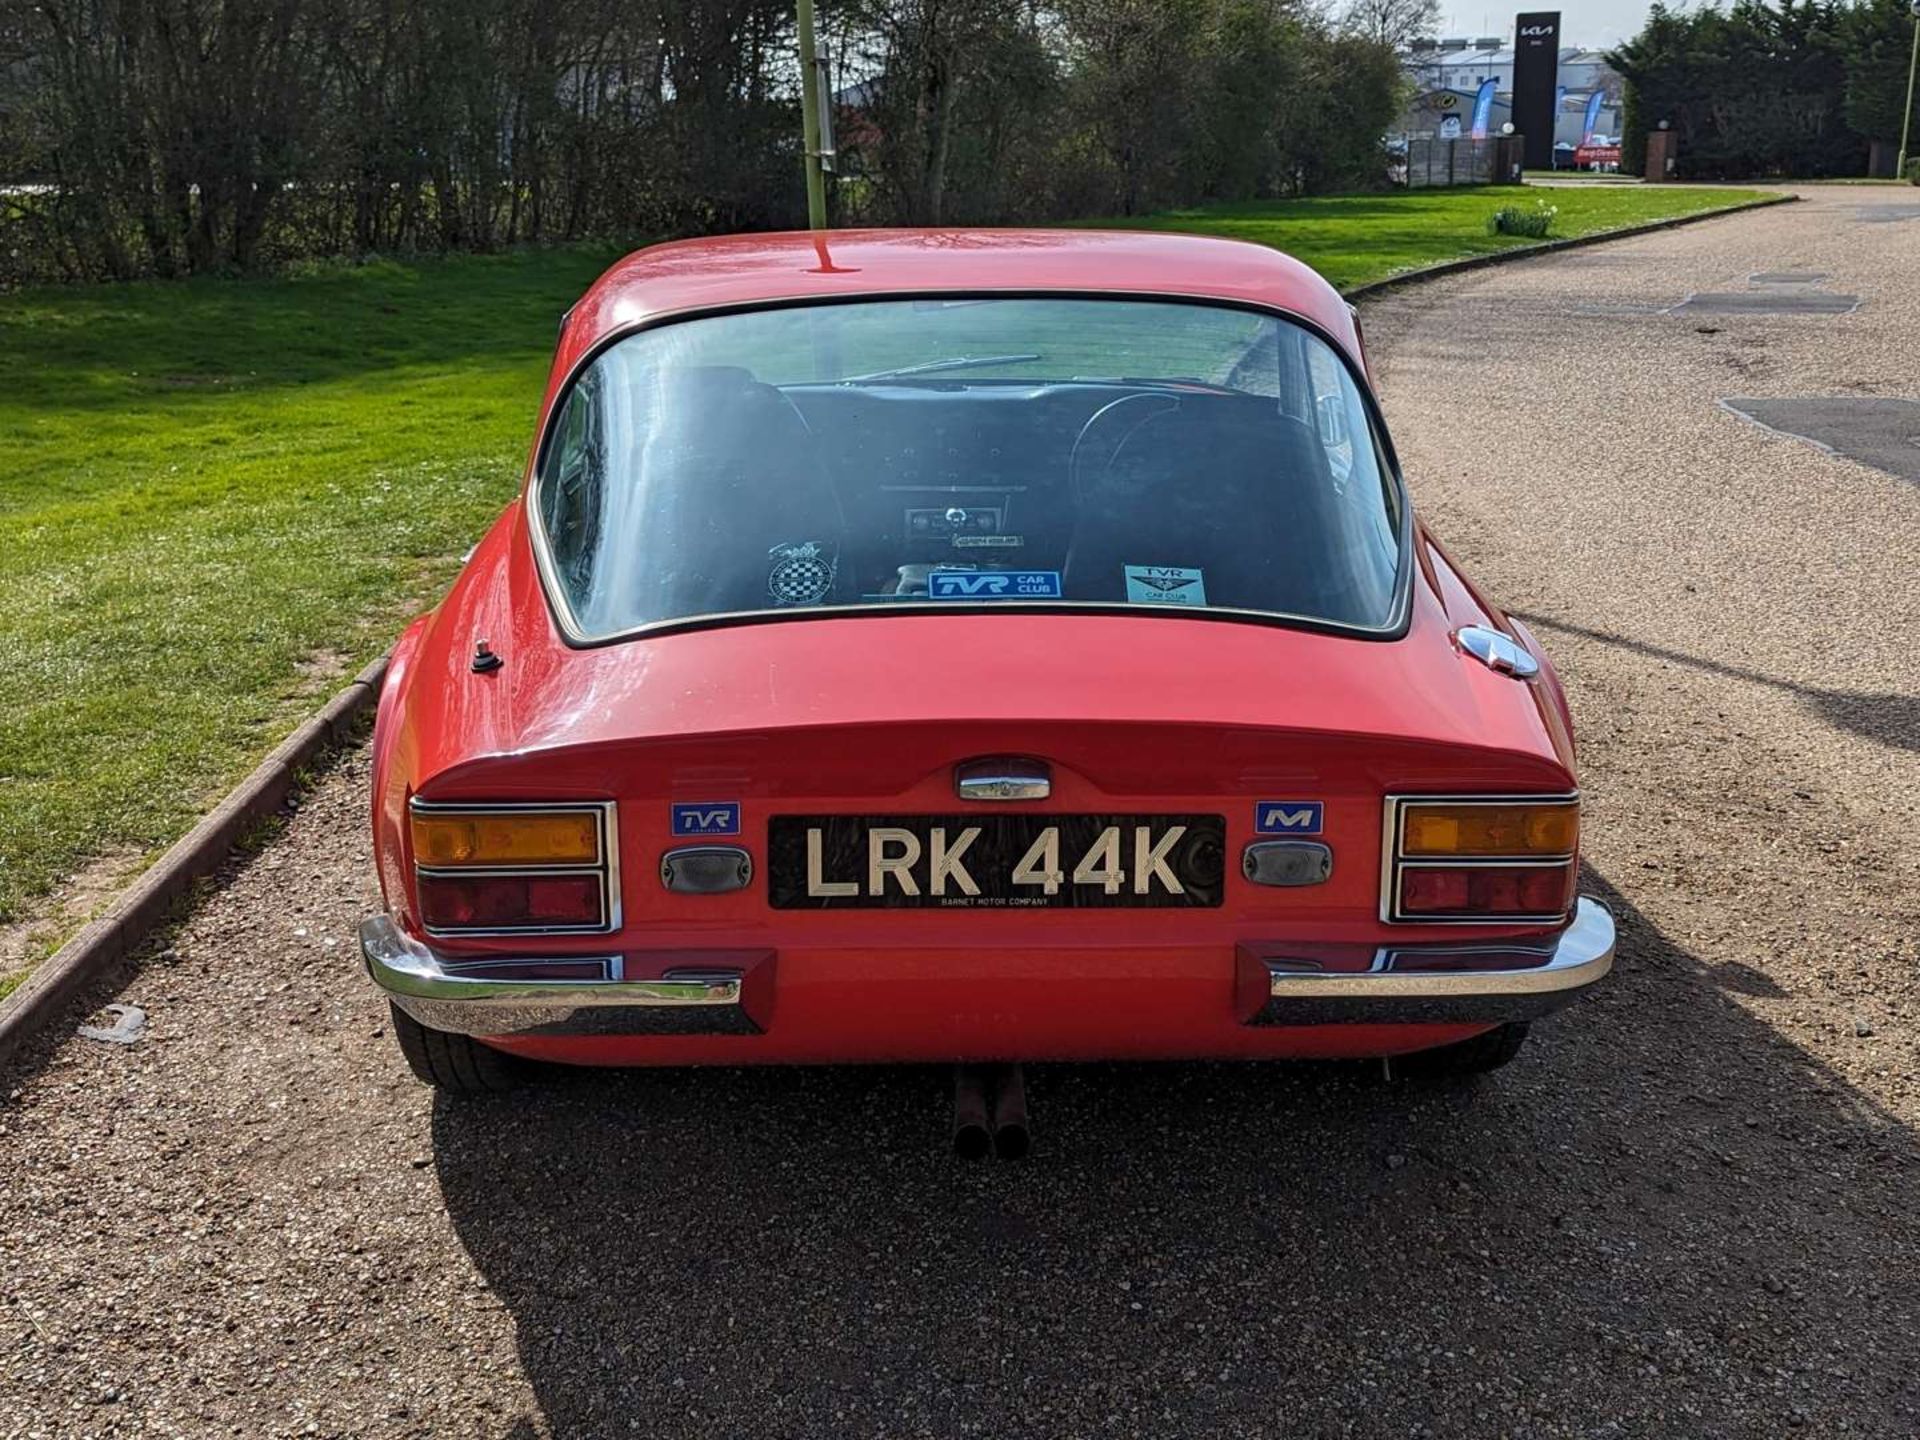 1972 TVR 2500M - Image 6 of 27